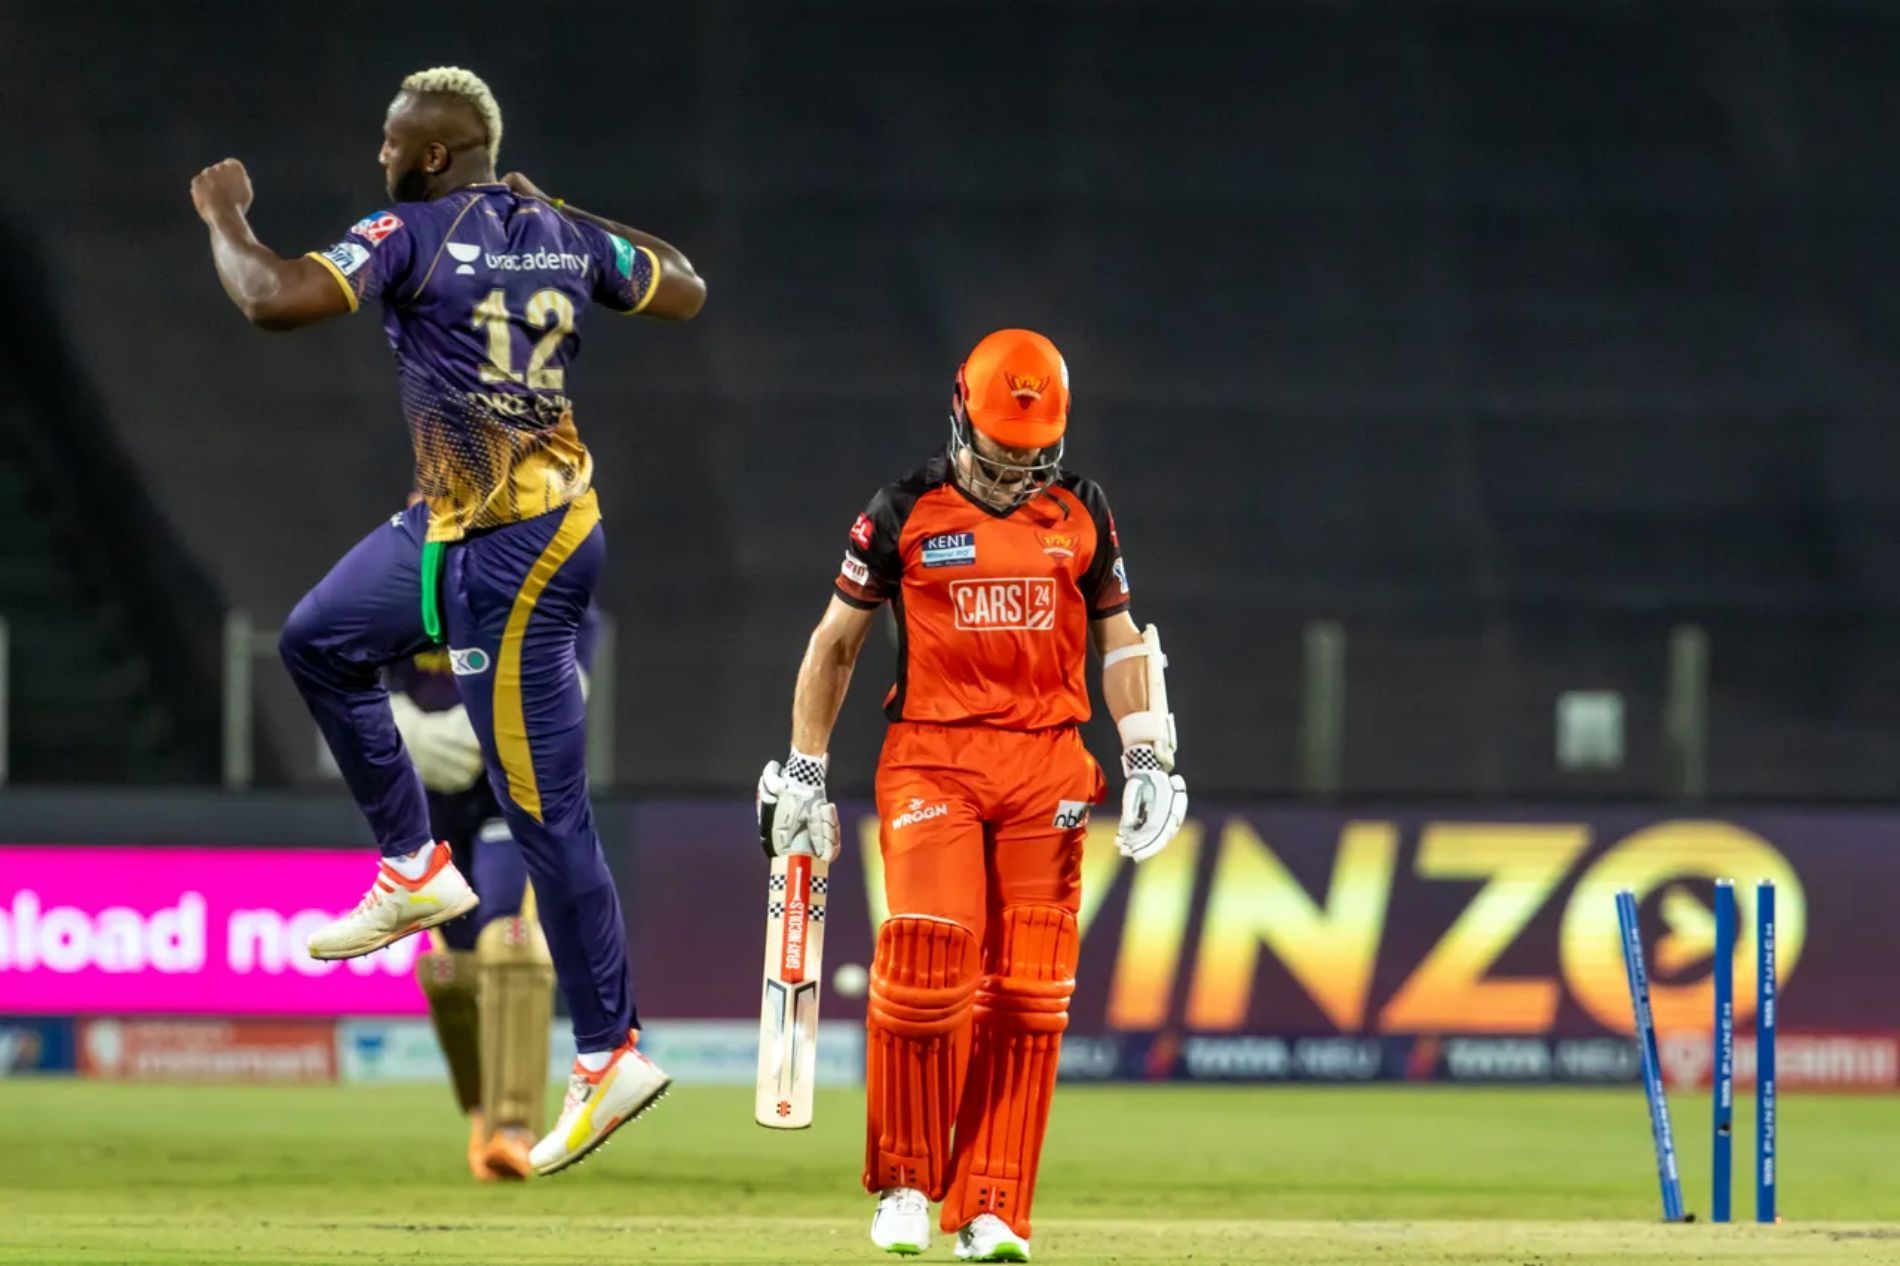 Kane Williamson walks back after being knocked over by Andre Russell. Pic: IPLT20.COM